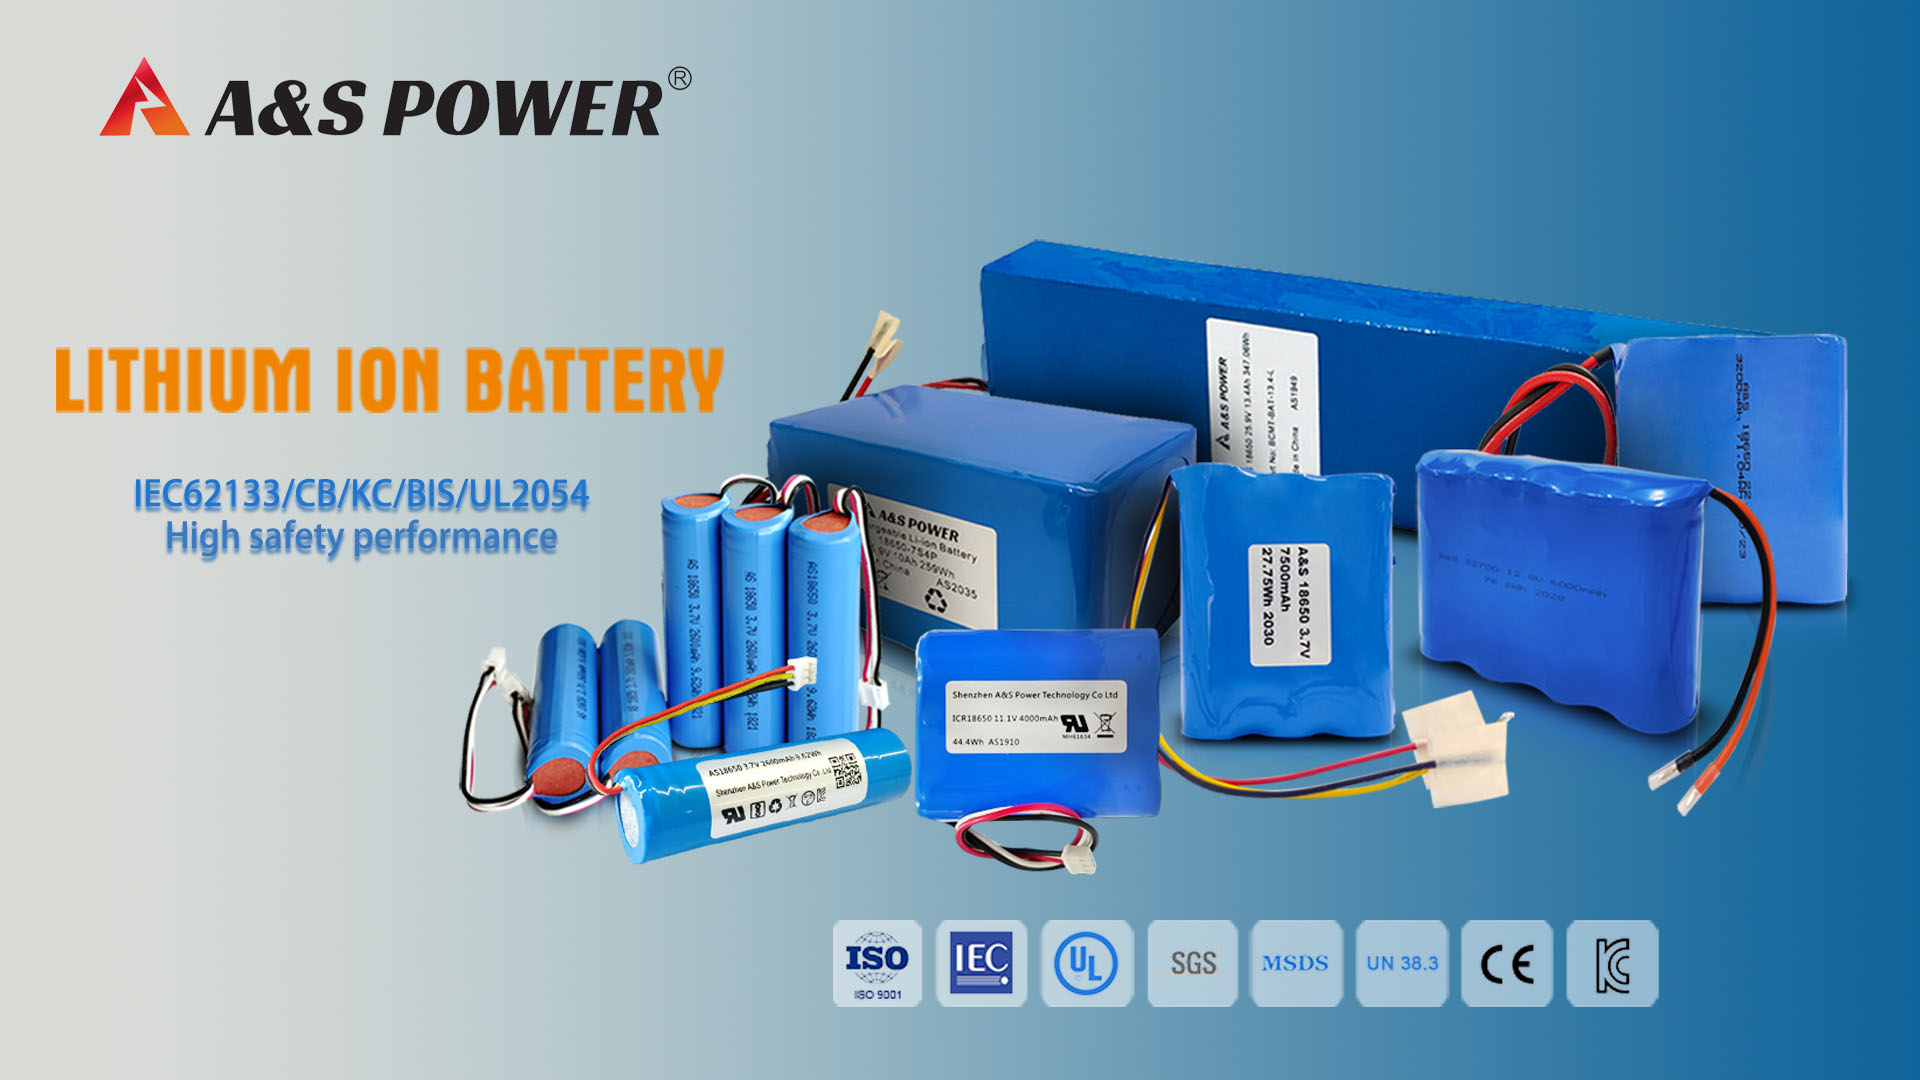 A&S Power Lithium-Ion Battery